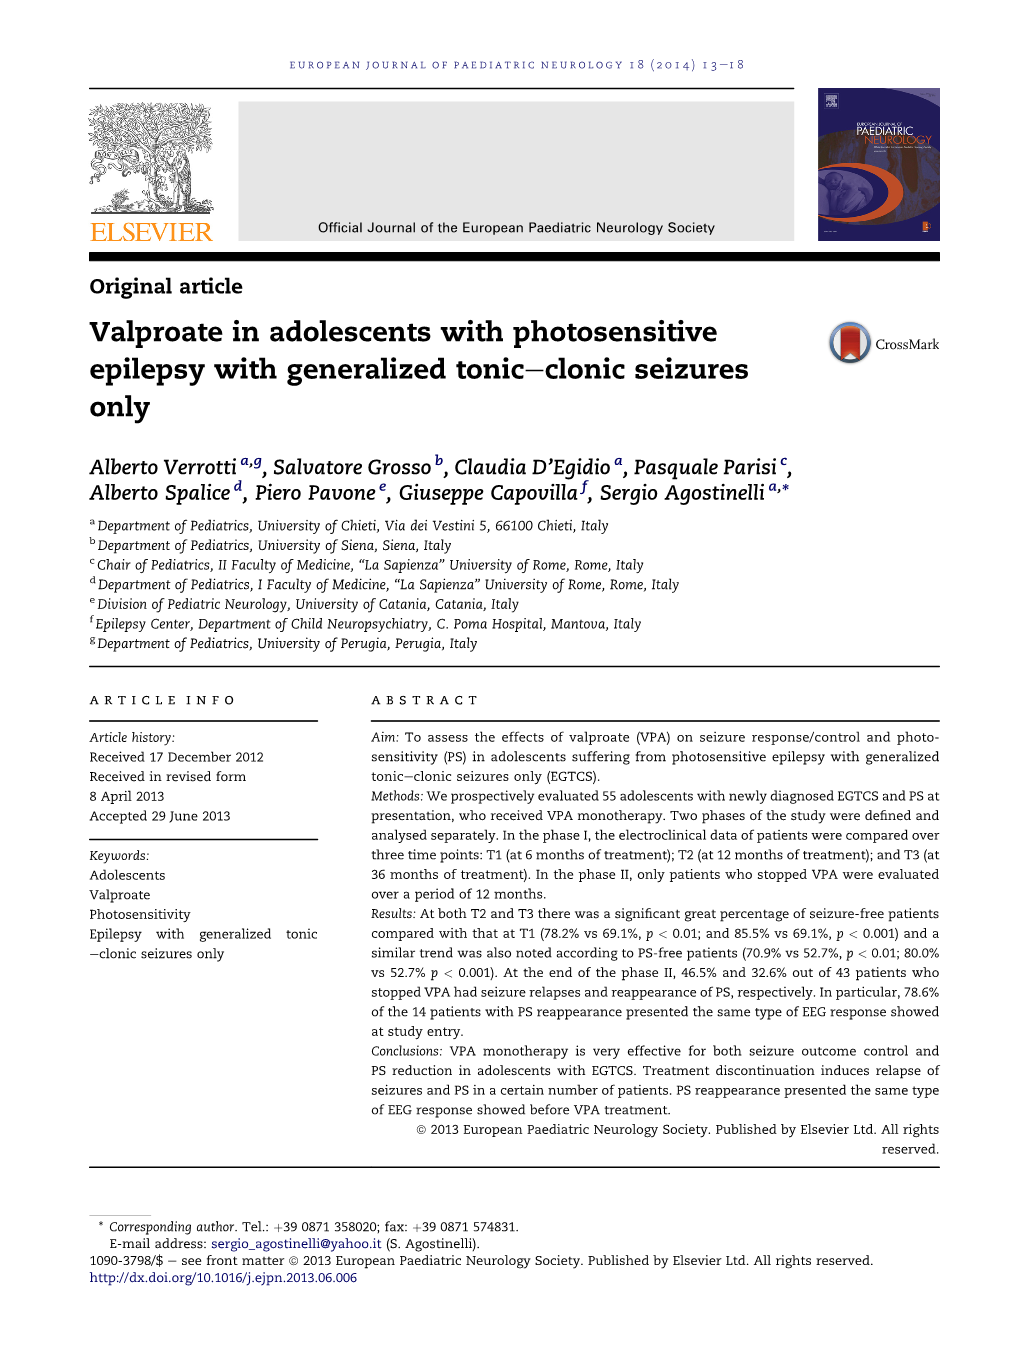 Valproate in Adolescents with Photosensitive Epilepsy with Generalized Tonic-Clonic Seizures Only